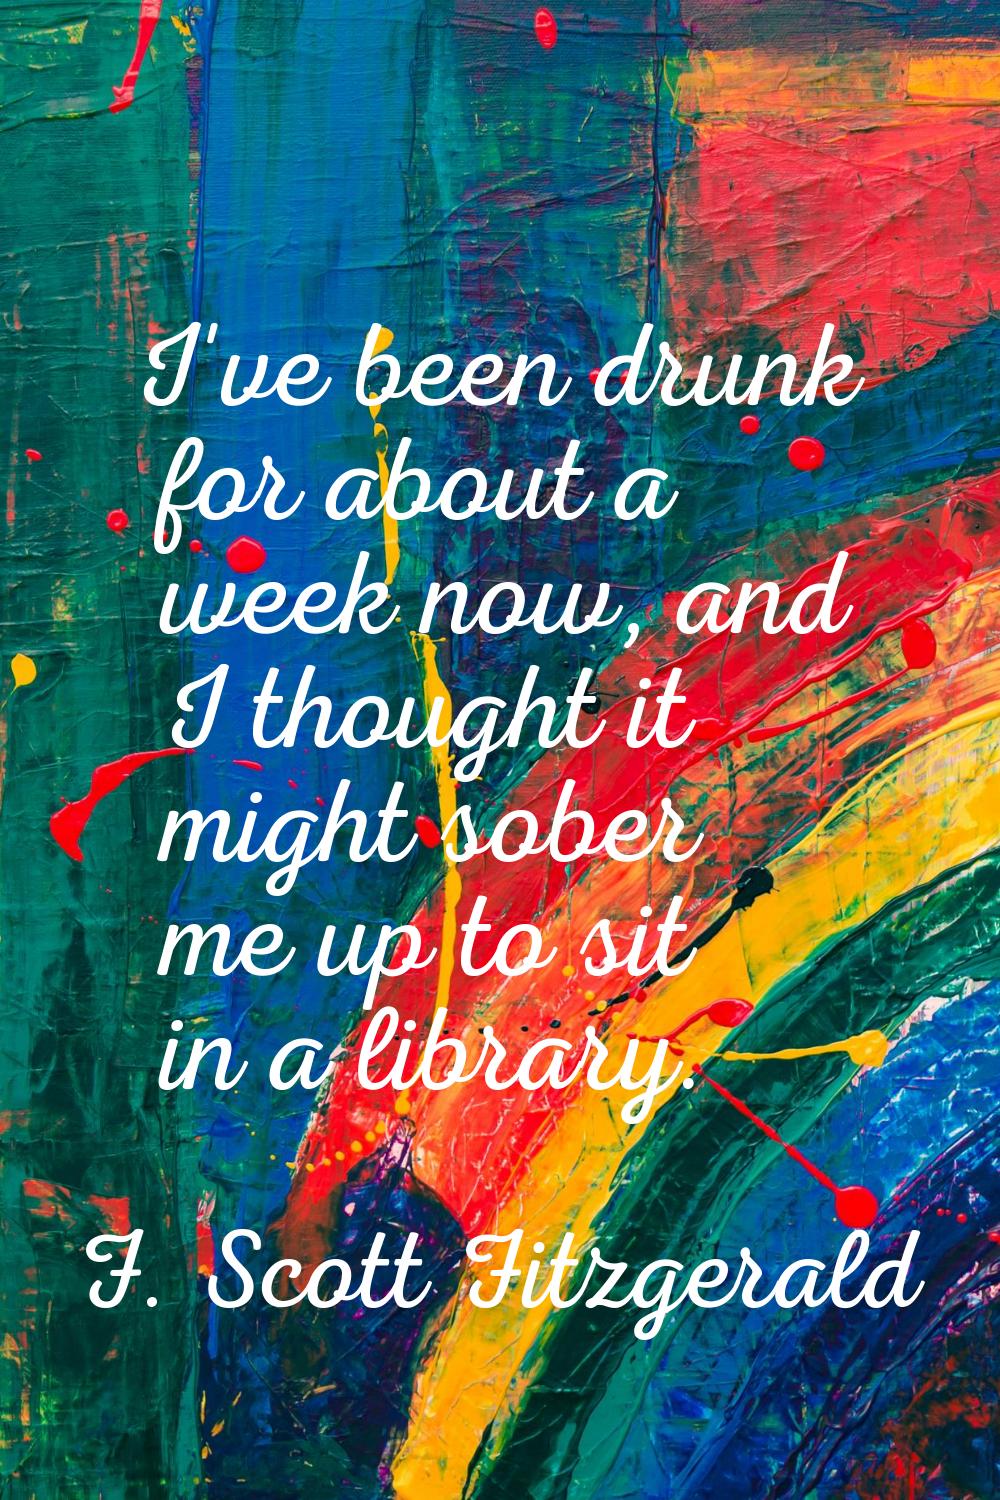 I've been drunk for about a week now, and I thought it might sober me up to sit in a library.